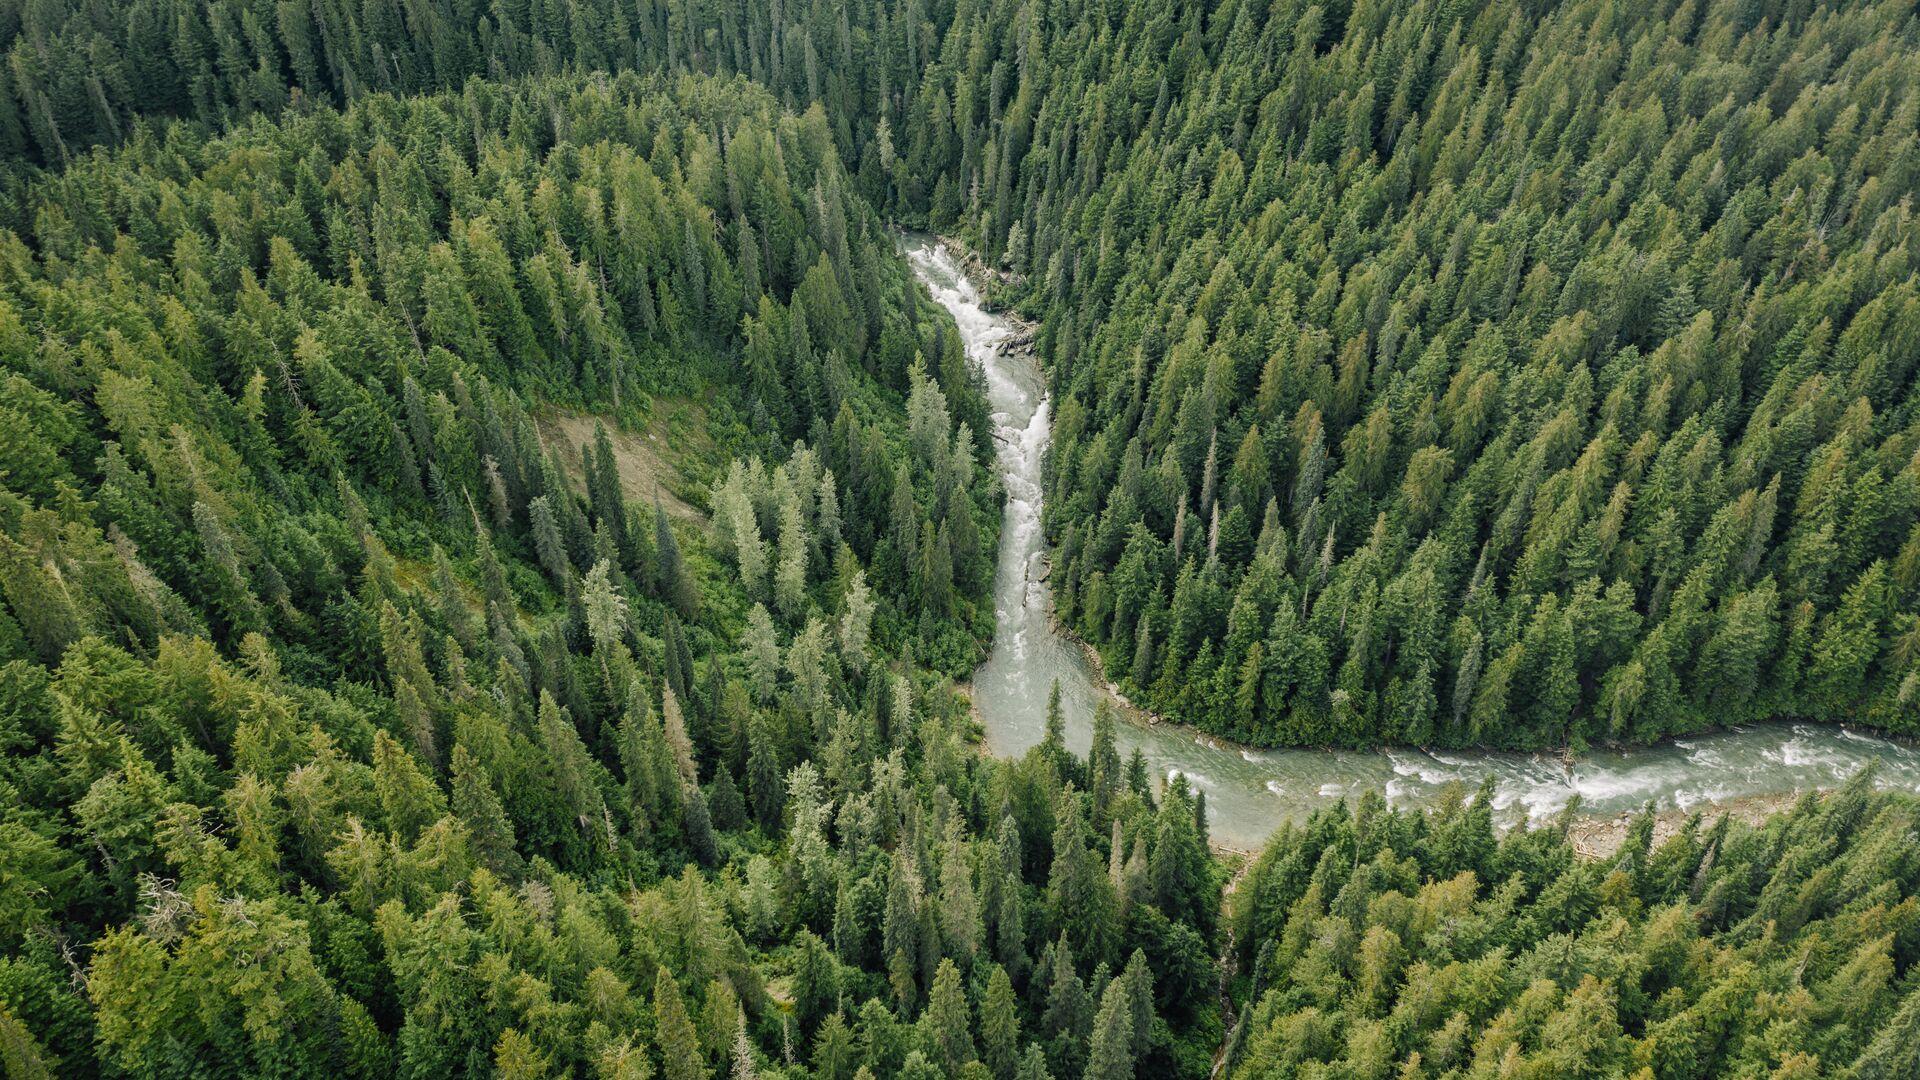 Aerial view of an evergreen forest with a river running through it.